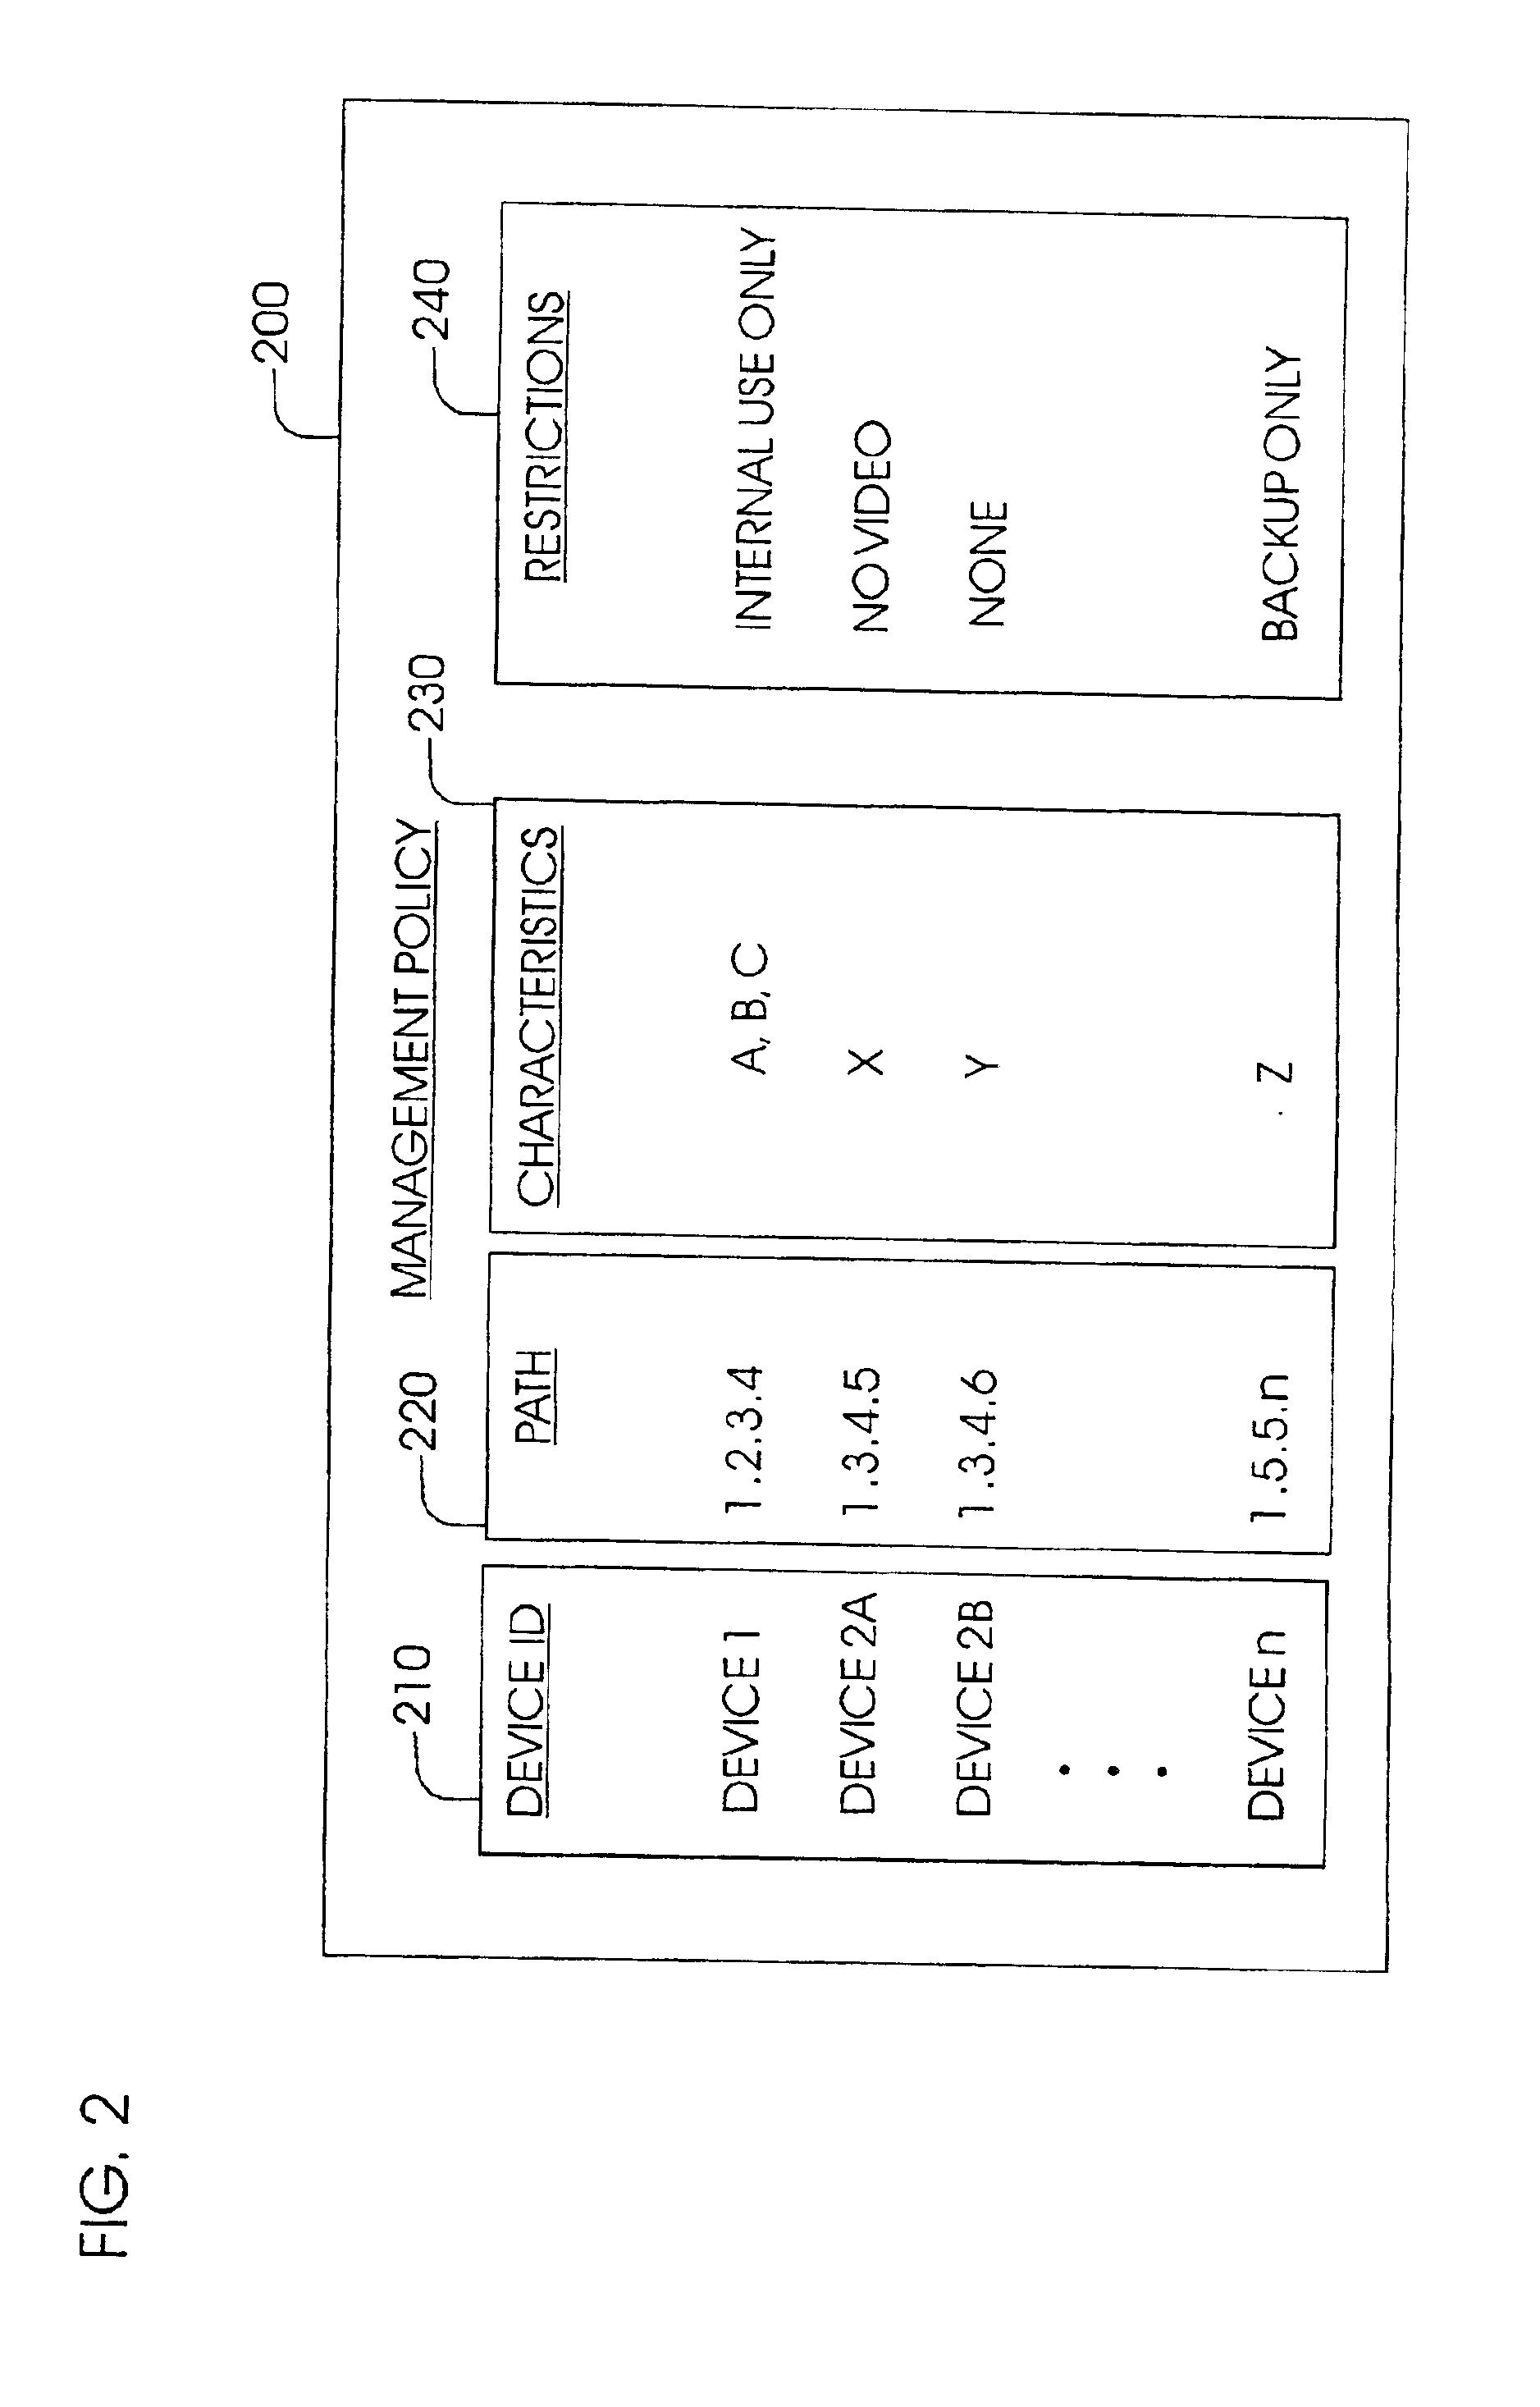 Apparatus and method for configuring storage capacity on a network for common use